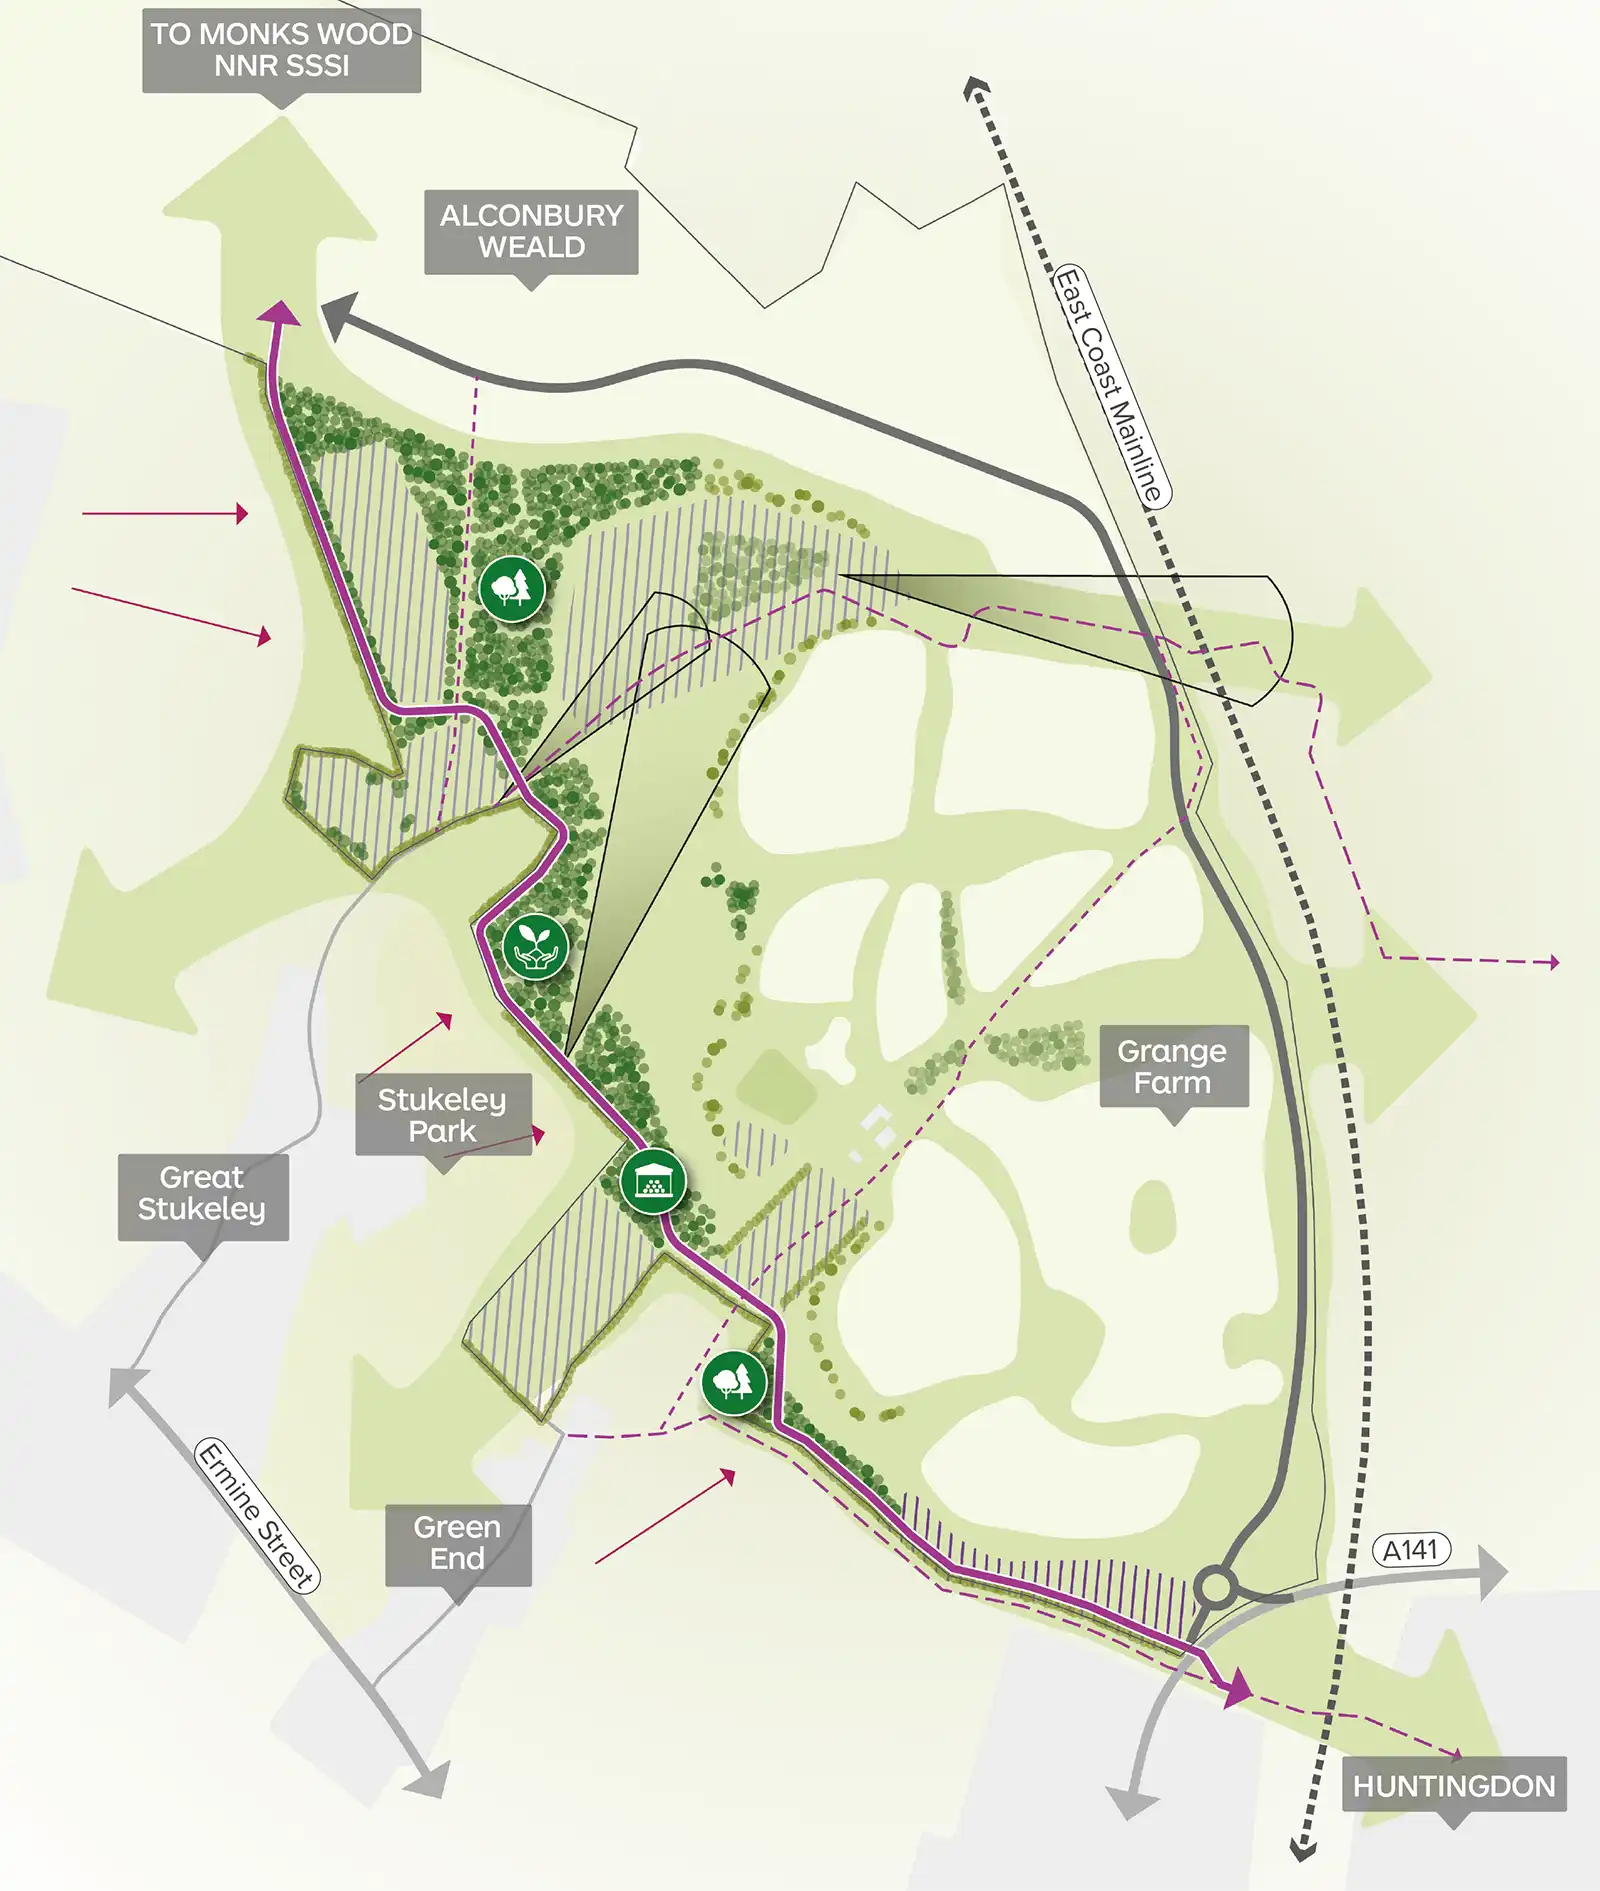 Map of Prestley Country Park showing woodland areas